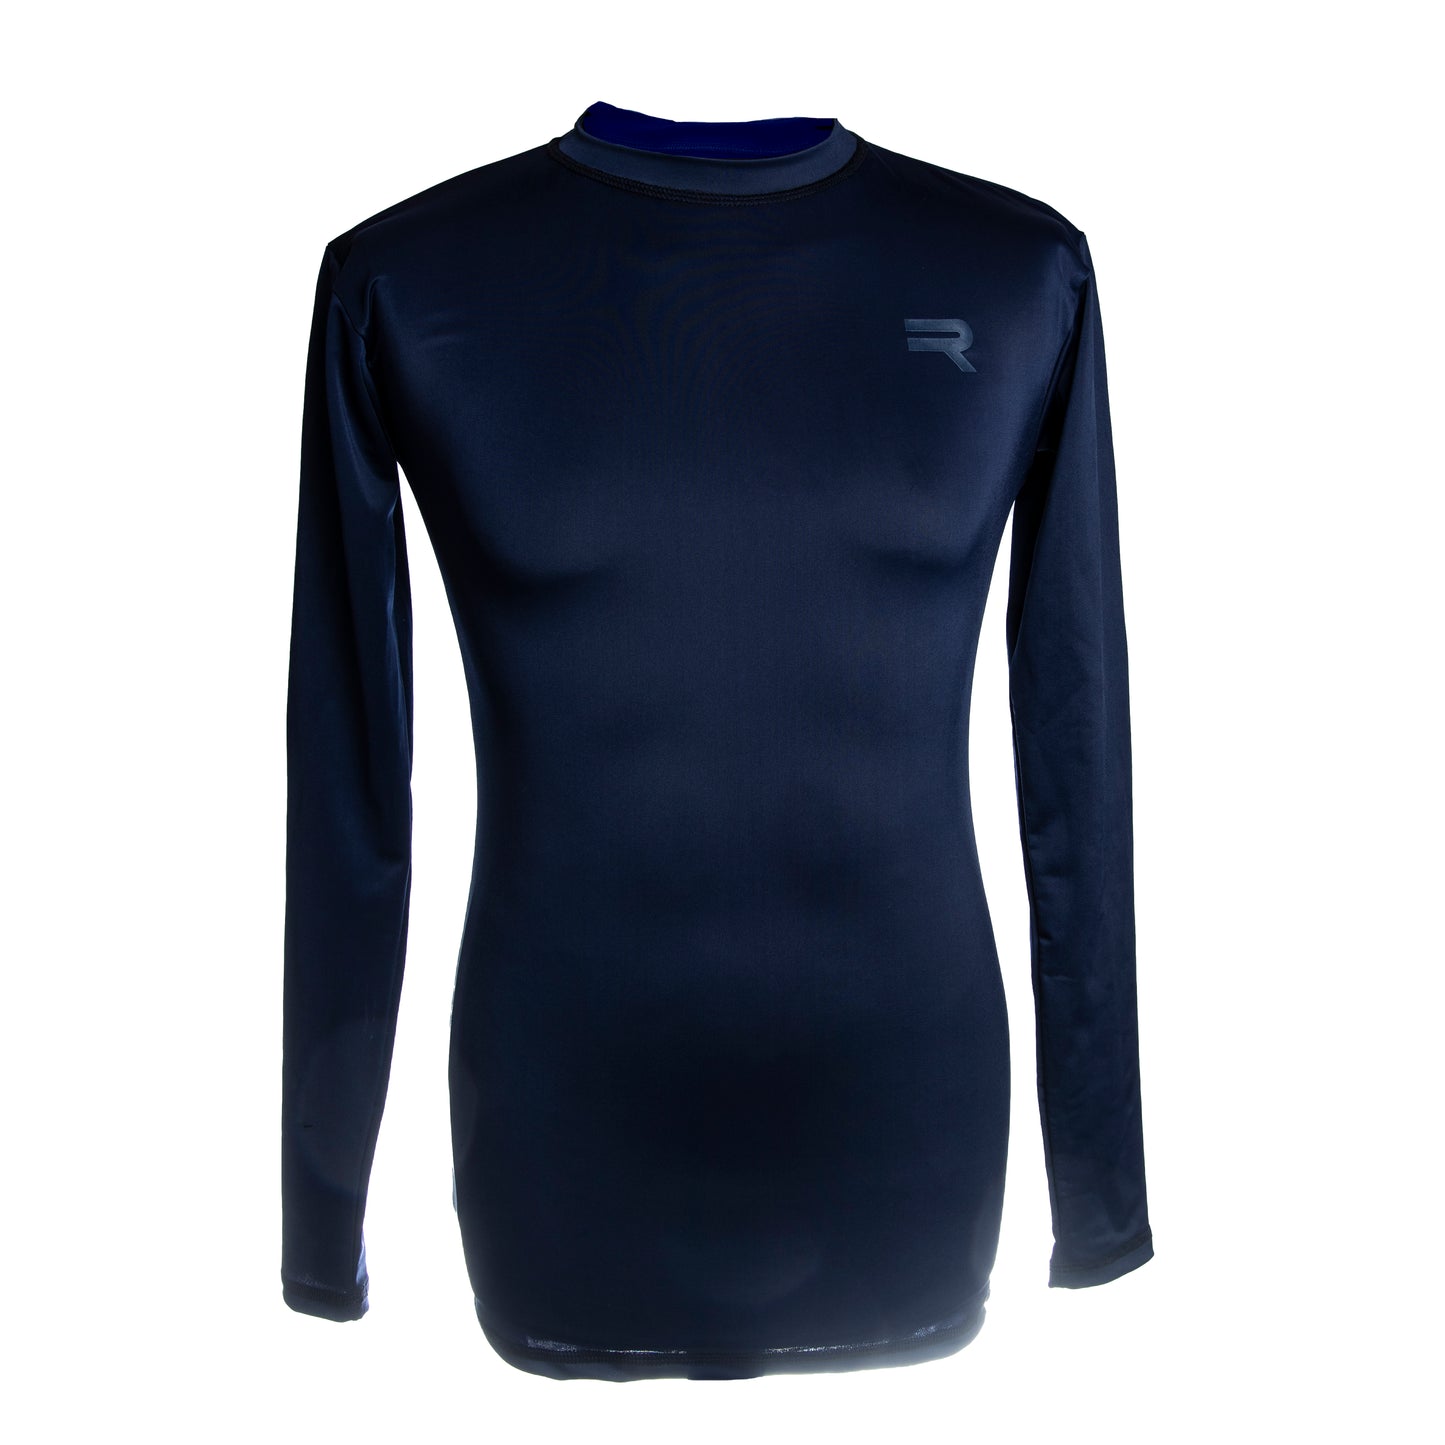 Compression / Base Layer Top - Navy